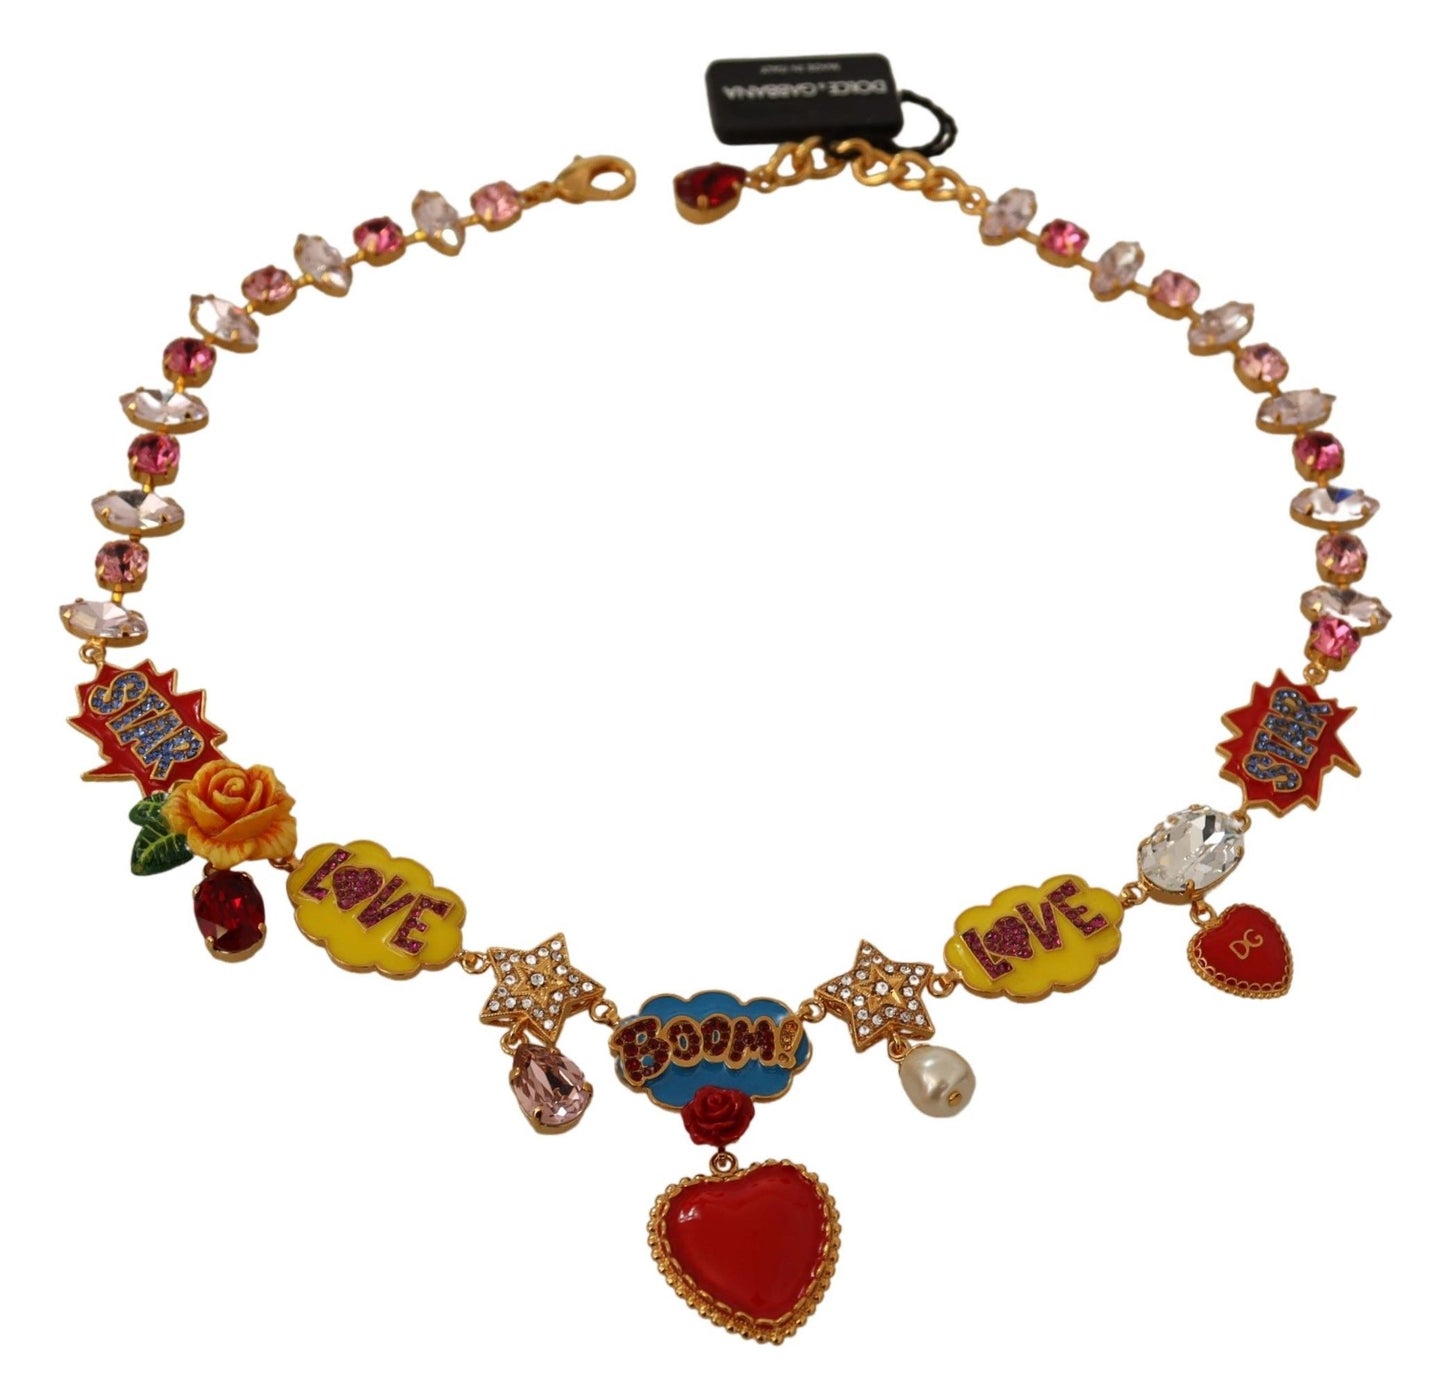 Charm Necklace with Hand-Painted Elements